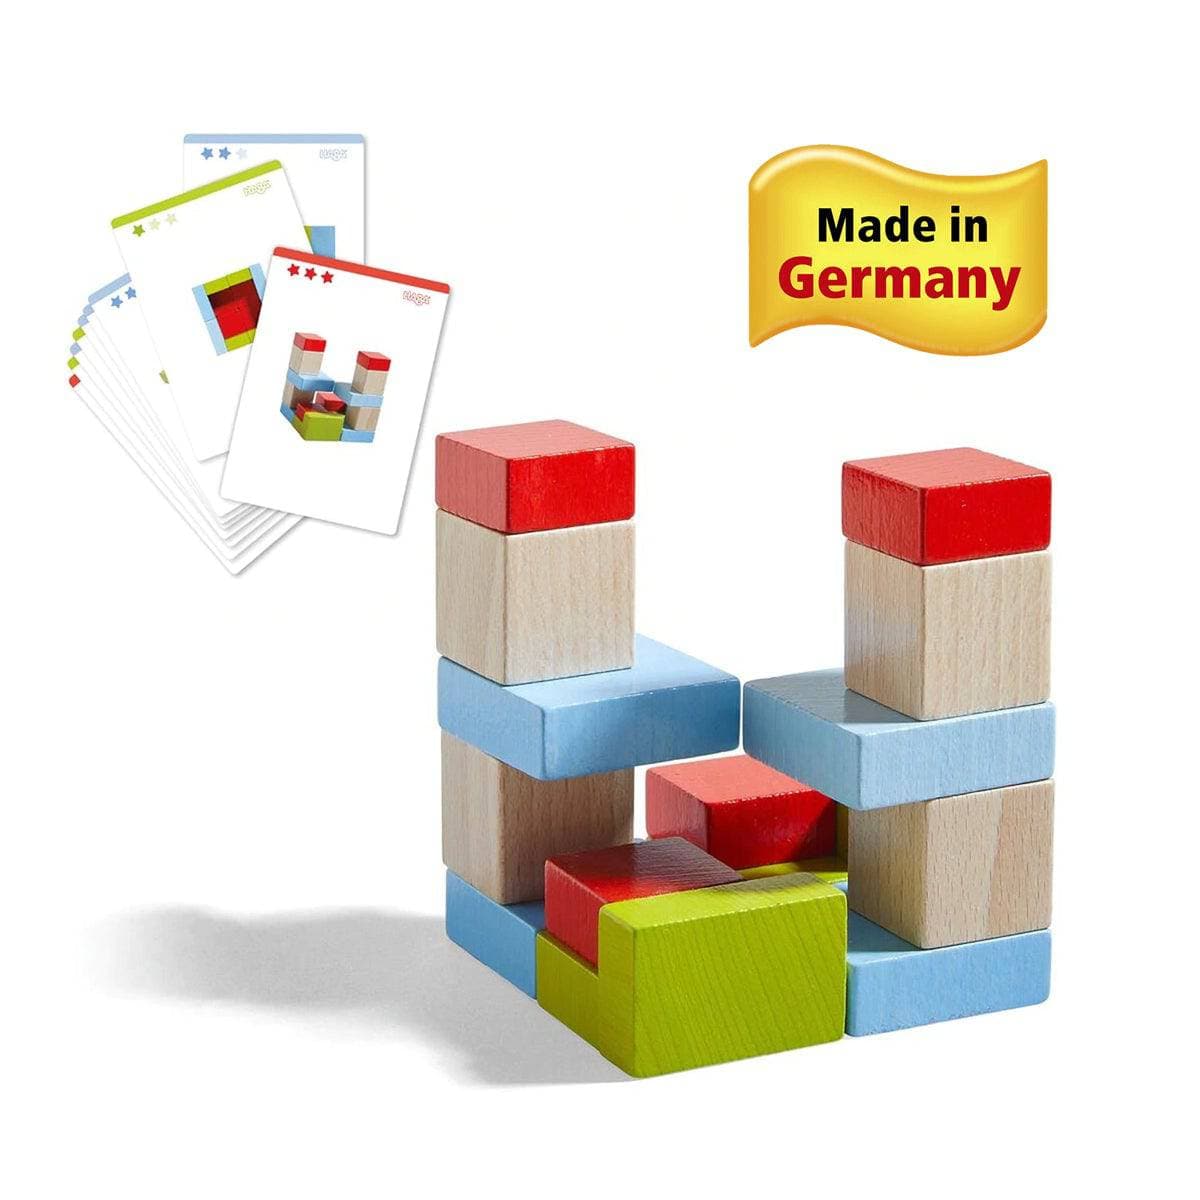 Four by Four 3D Arranging Game Wooden Building Blocks